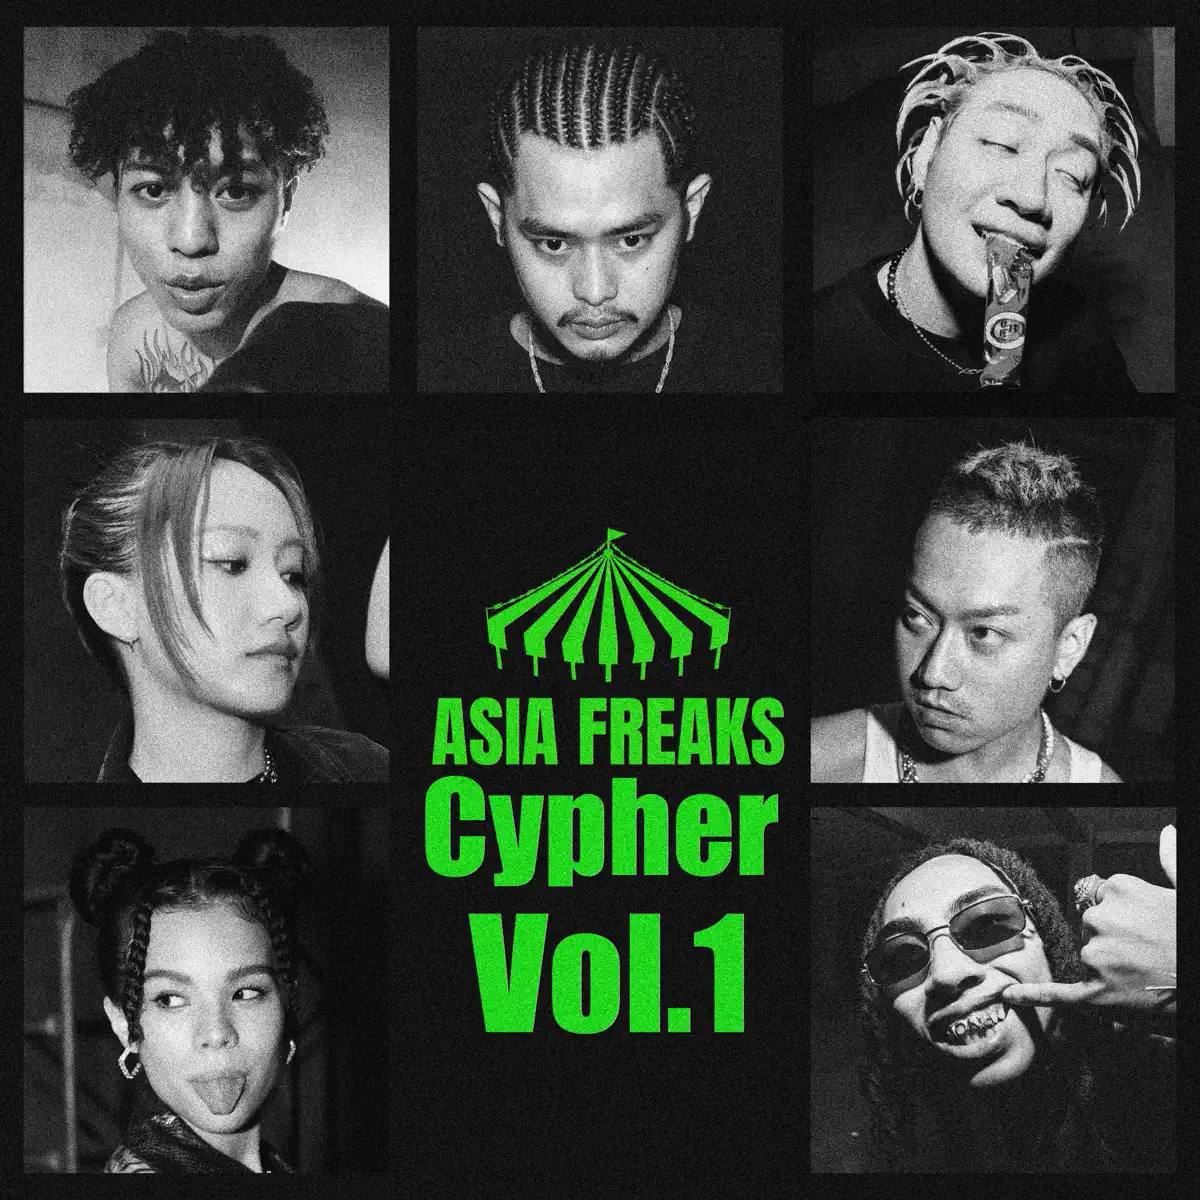 AsiaFreaks, Majin, 五木, Asiaboy 禁藥王 & Lizi 栗子, 陳星翰, E1and & 潮州土狗 - AsiaFreaks Cypher Vol. 1 - Single (2023) [iTunes Plus AAC M4A]-新房子